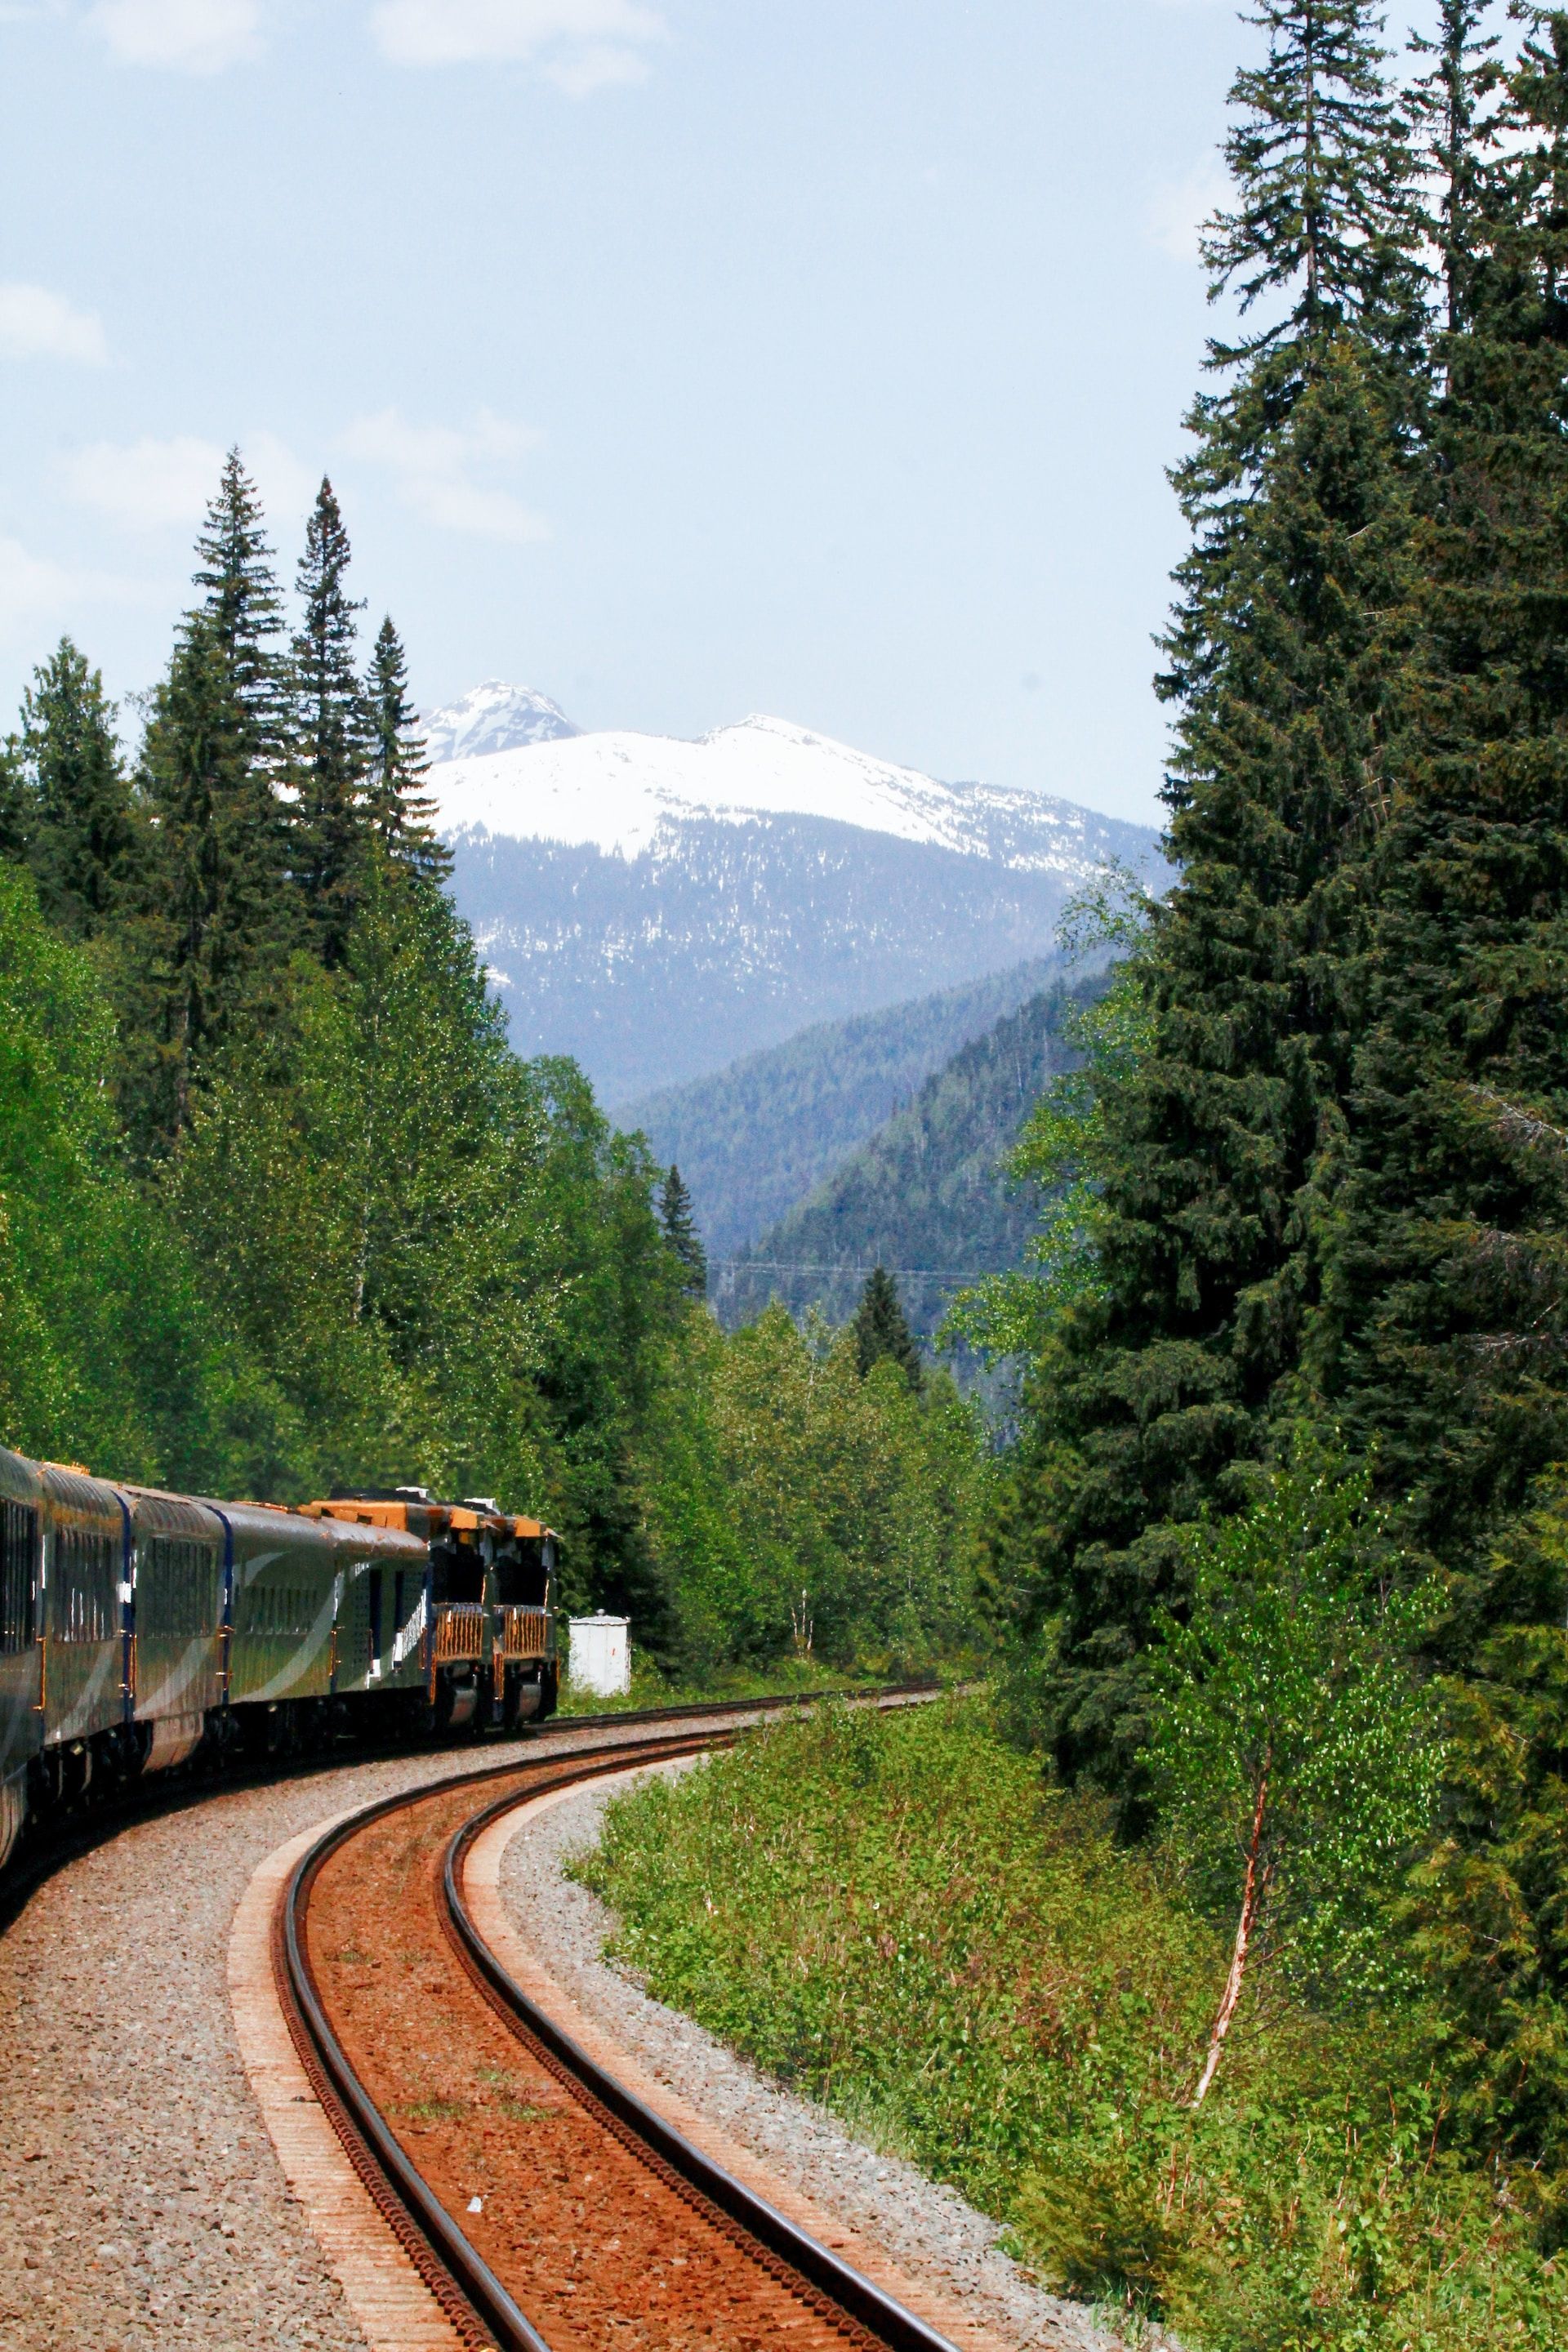 The Rocky Mountaineer cruising down the tracks in Canada